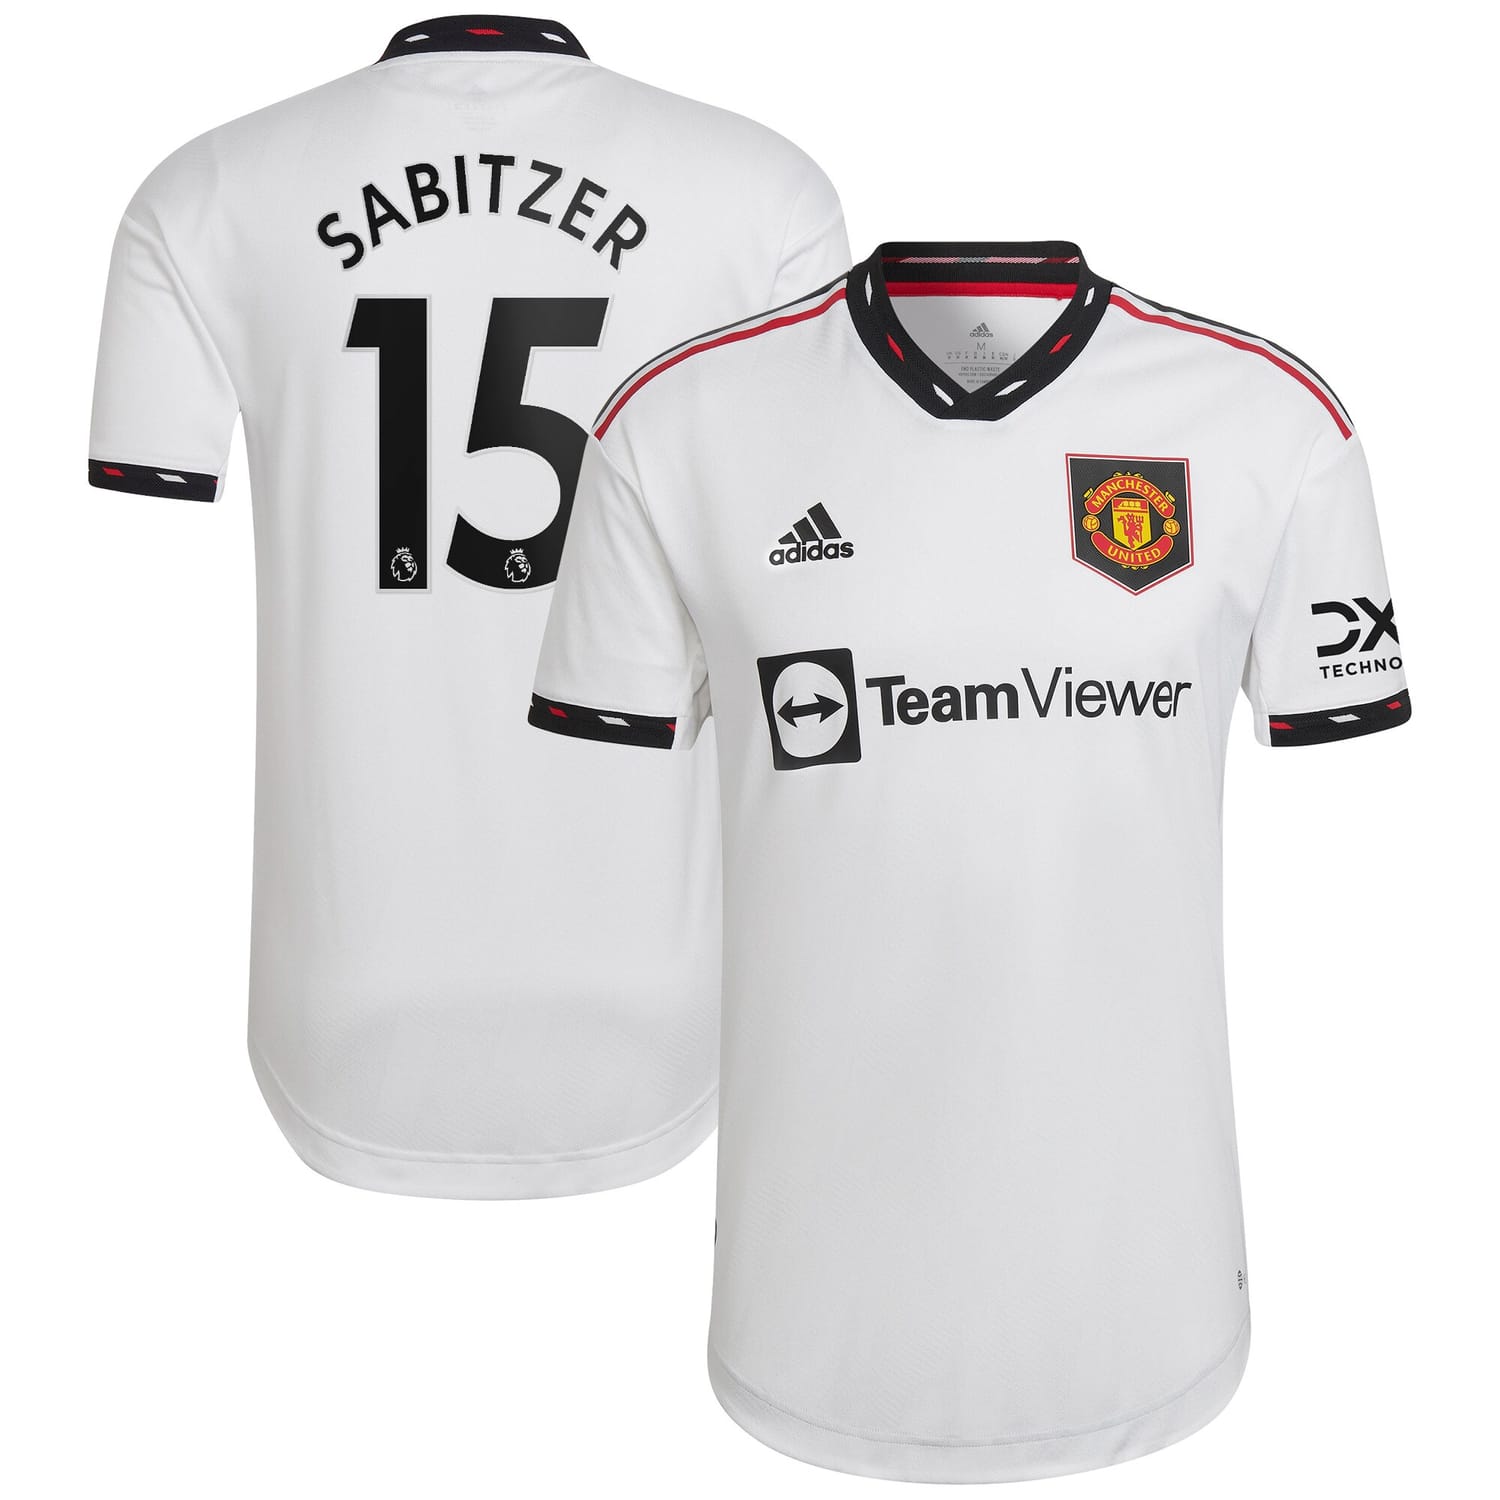 Premier League Manchester United Away Authentic Jersey Shirt 2022-23 player Marcel Sabitzer 15 printing for Men